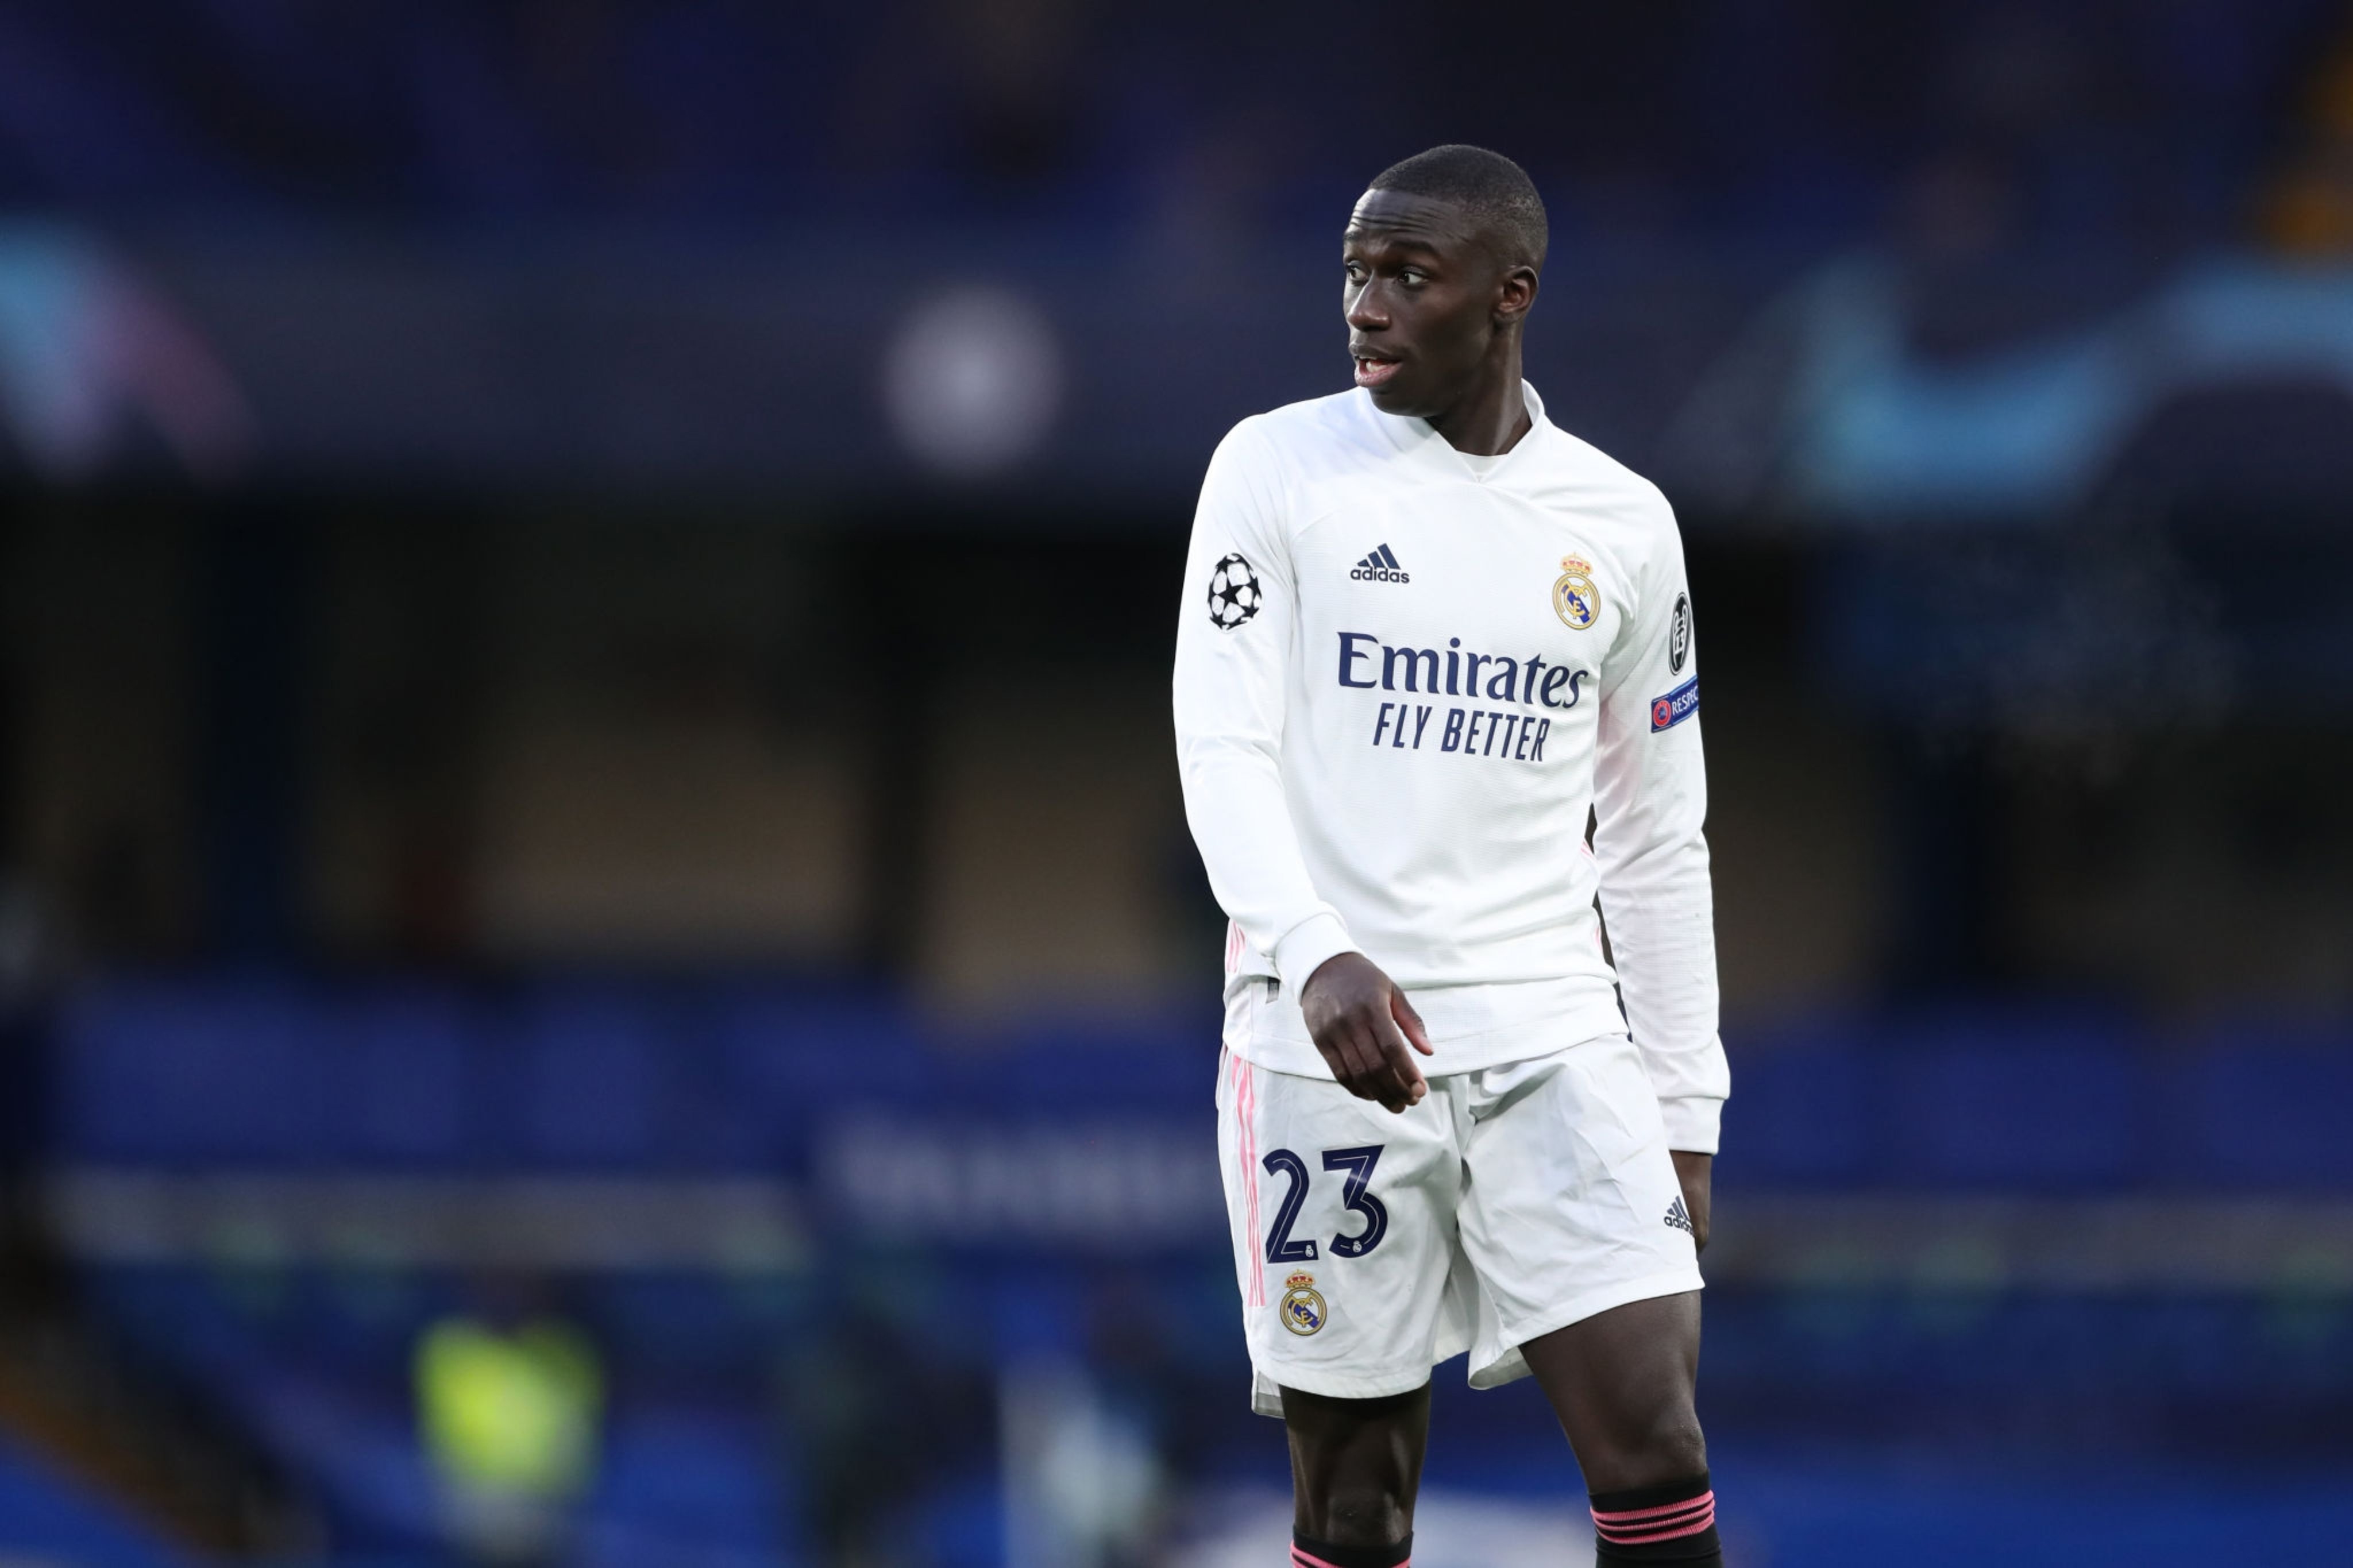 Ferland Mendy unlikely to play again for Real Madrid this season after shin injury